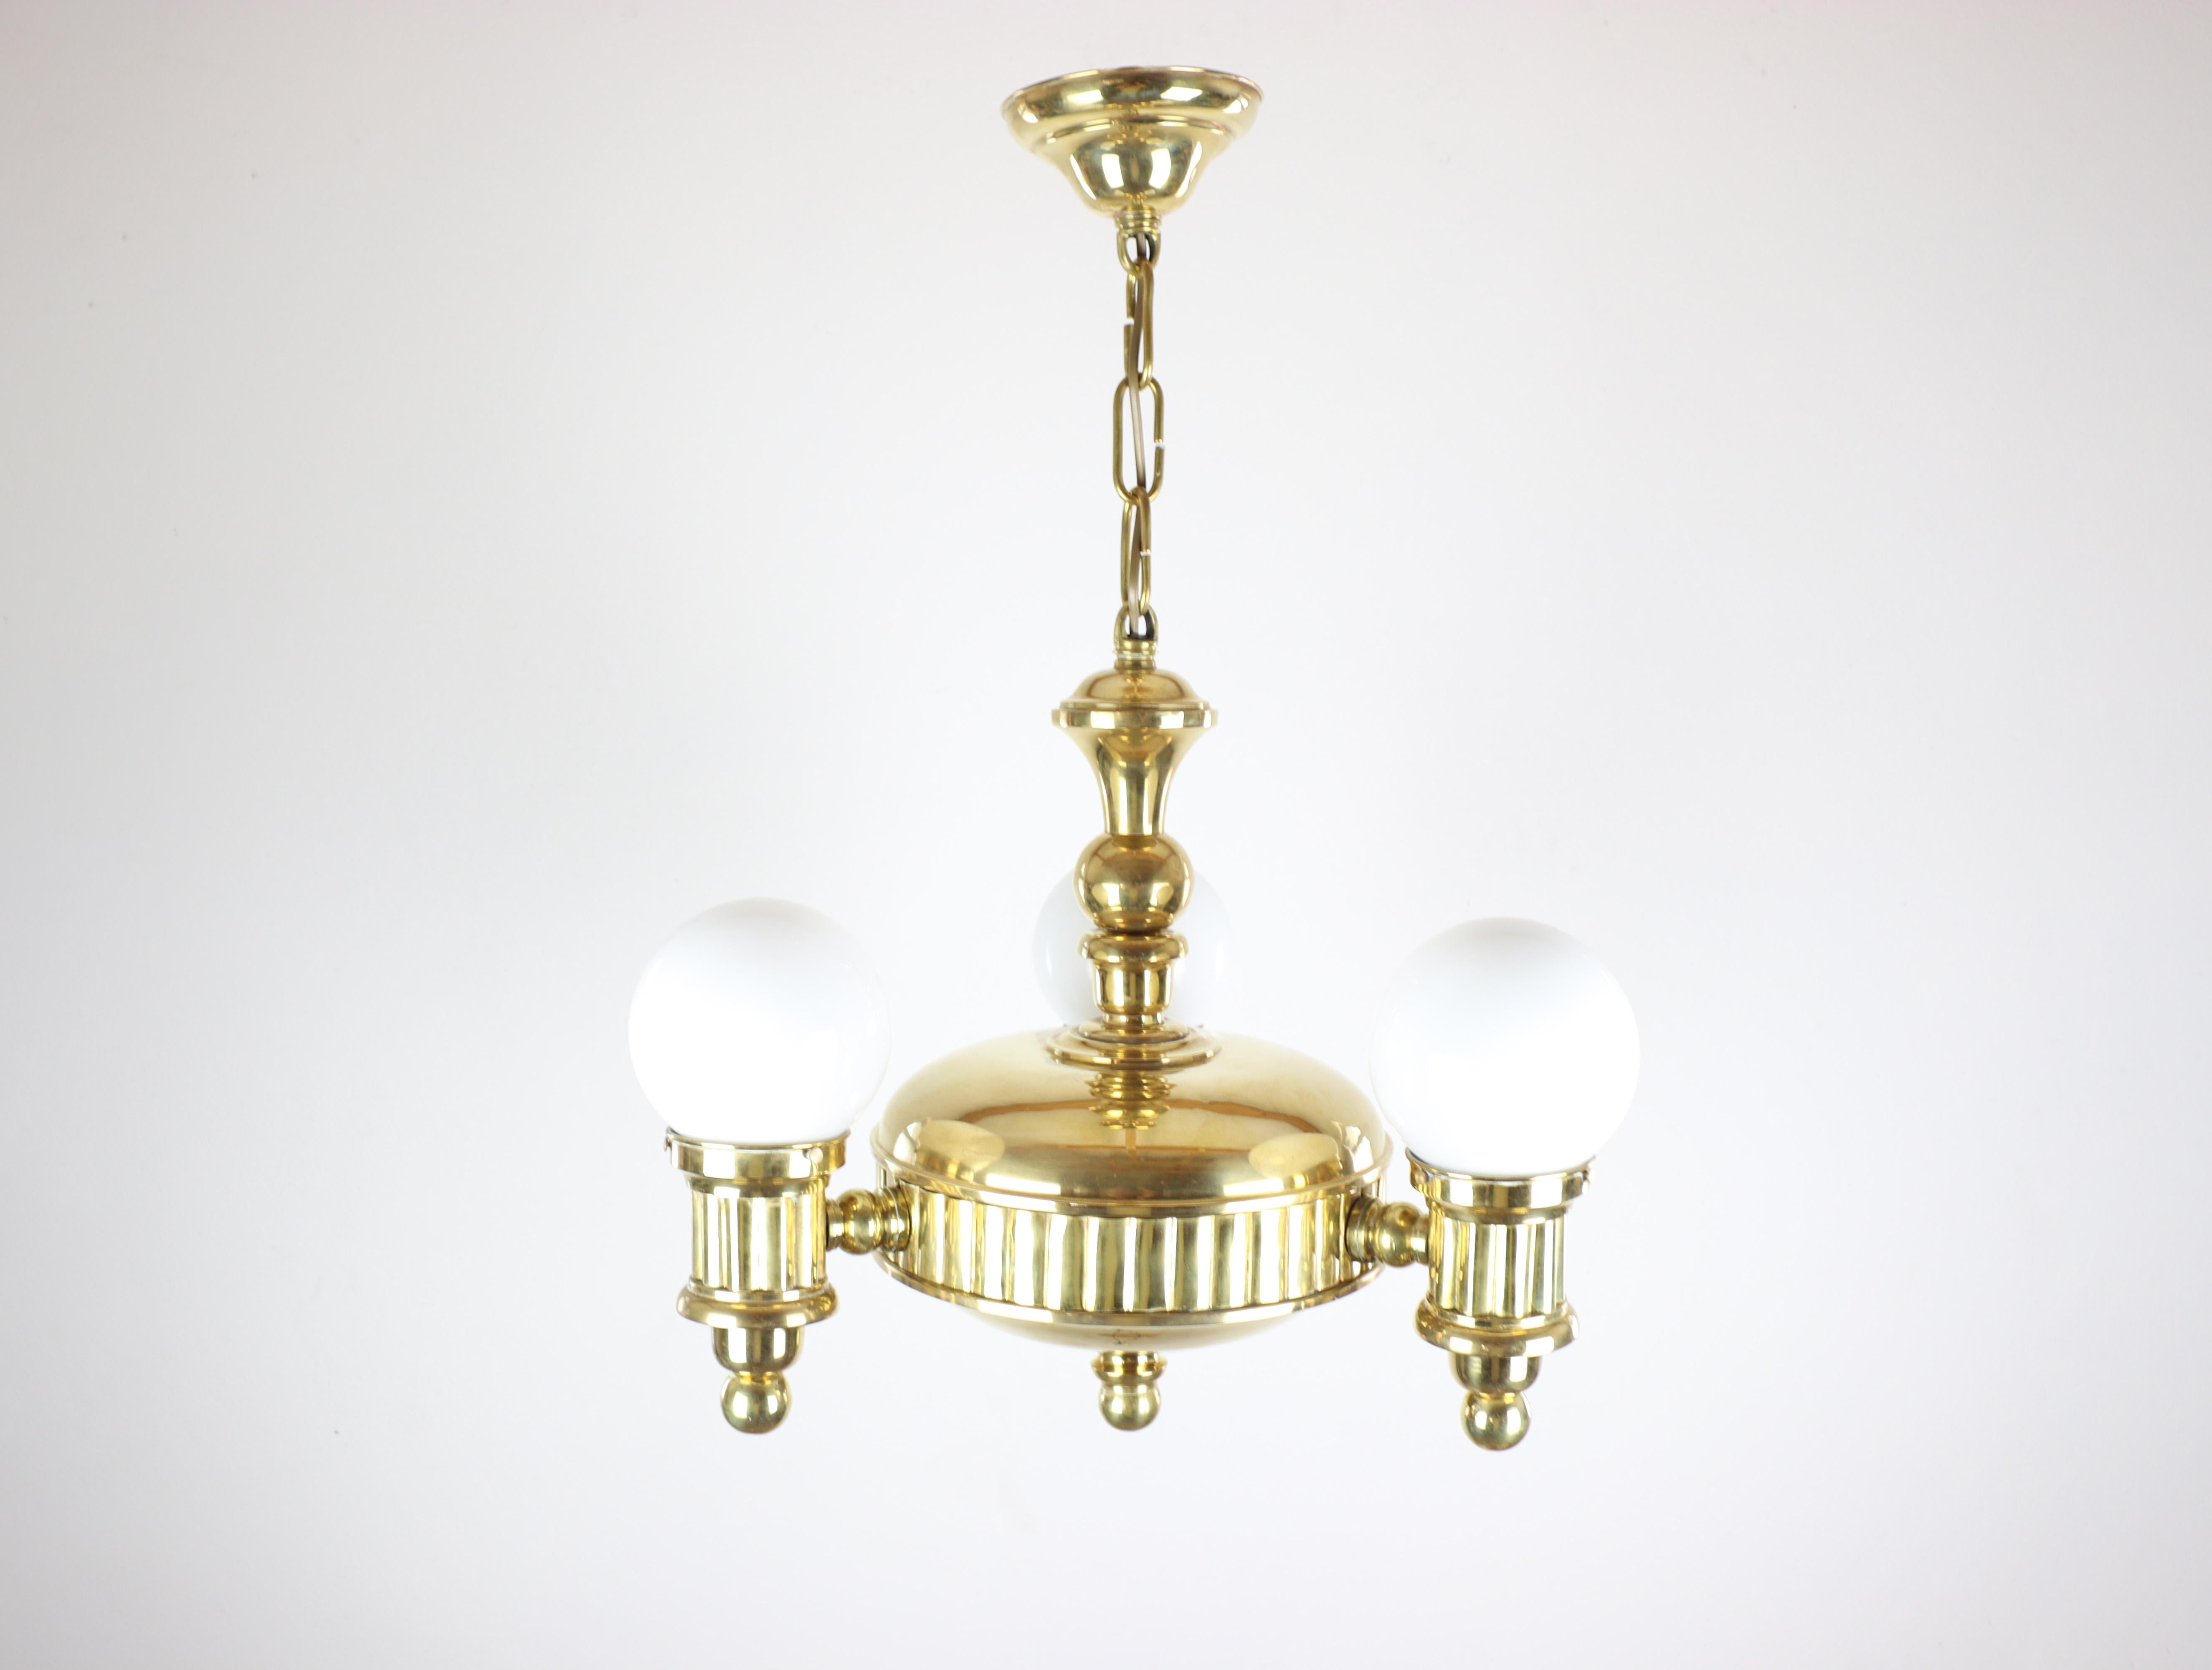 Exclusive Art Deco Chandelier with Swivel Arms 'Three-Arm Design' For Sale 1